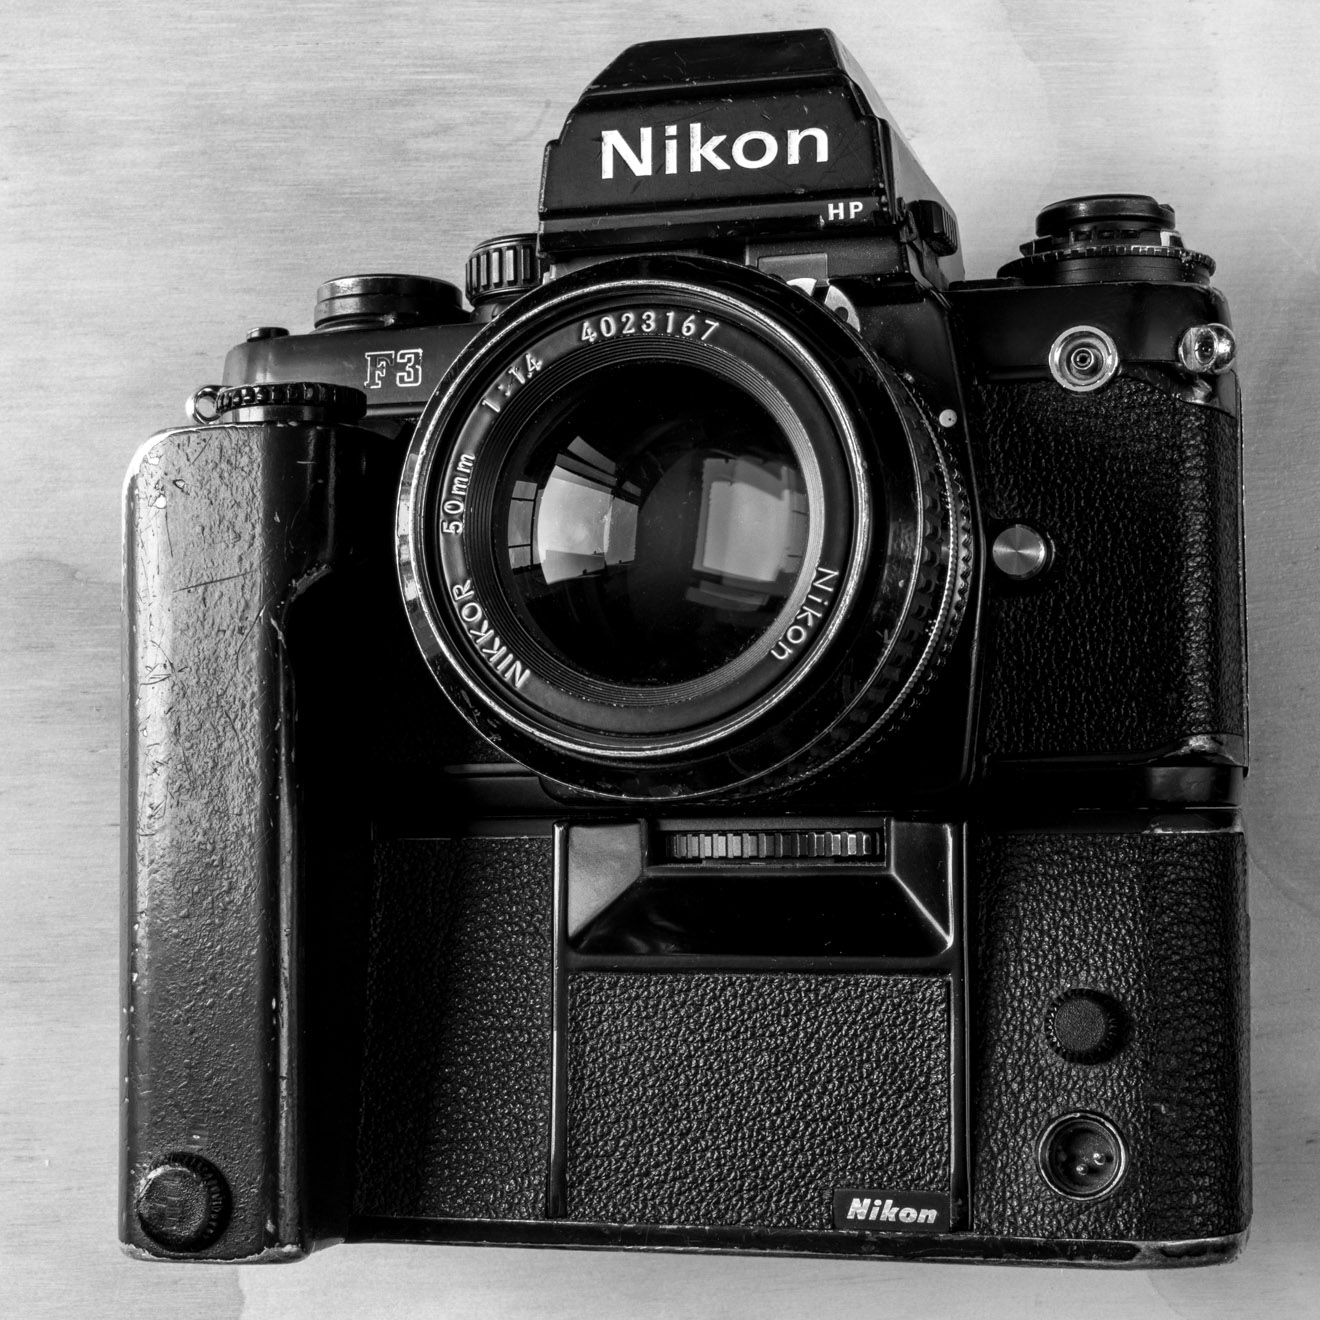 National Camera Day - post your photo of that special camera